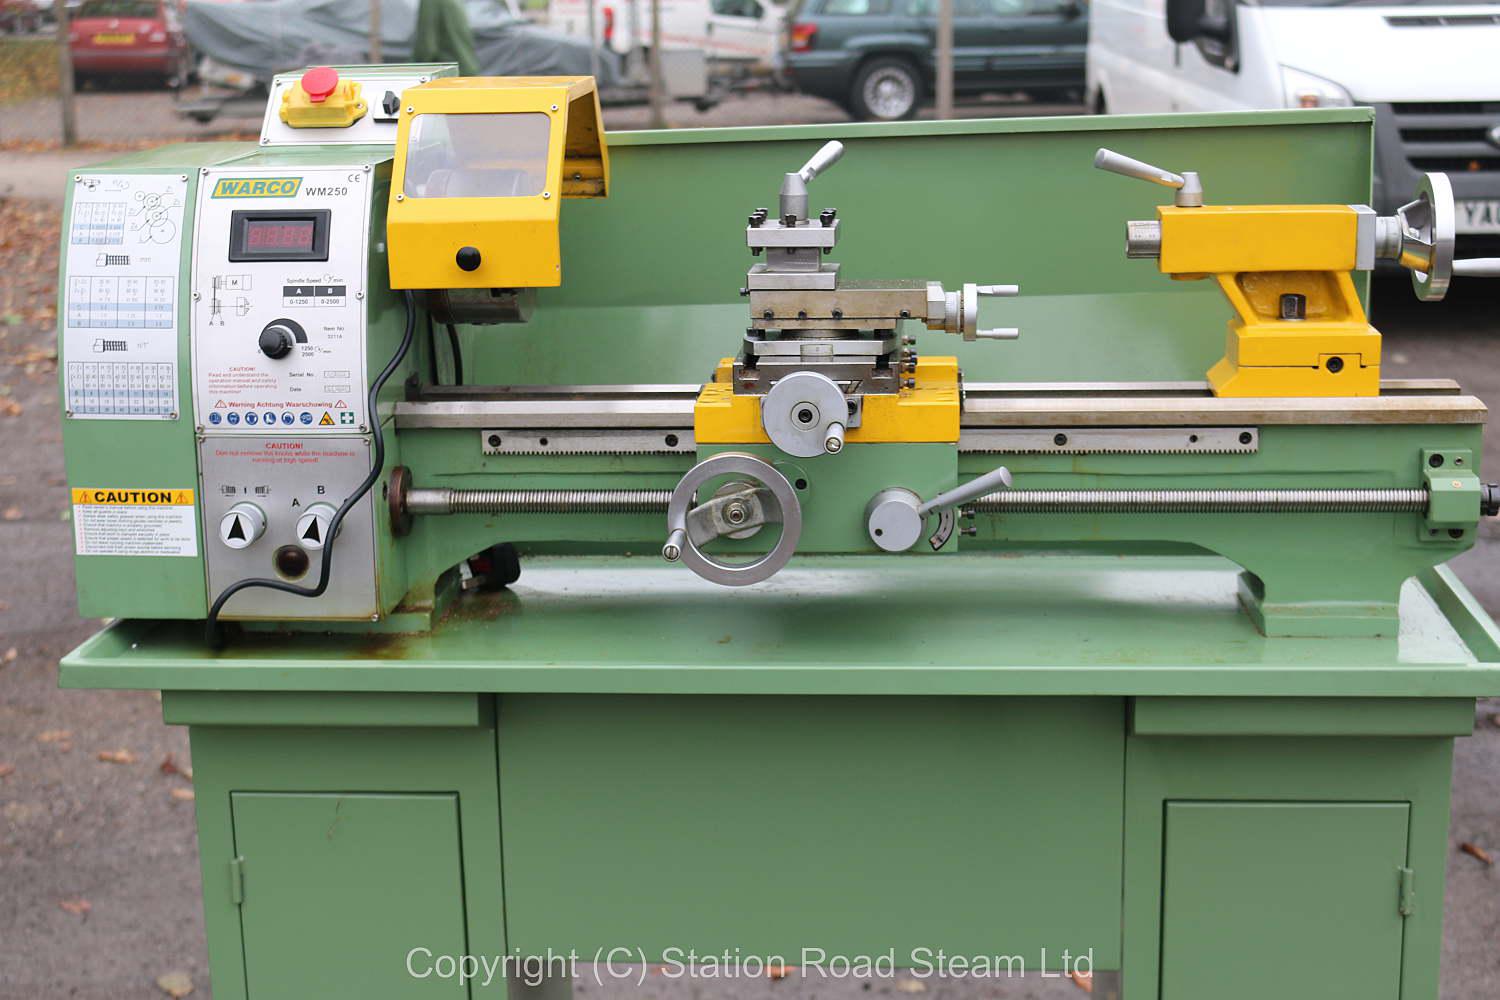 Warco WM250 lathe with cabinet stand